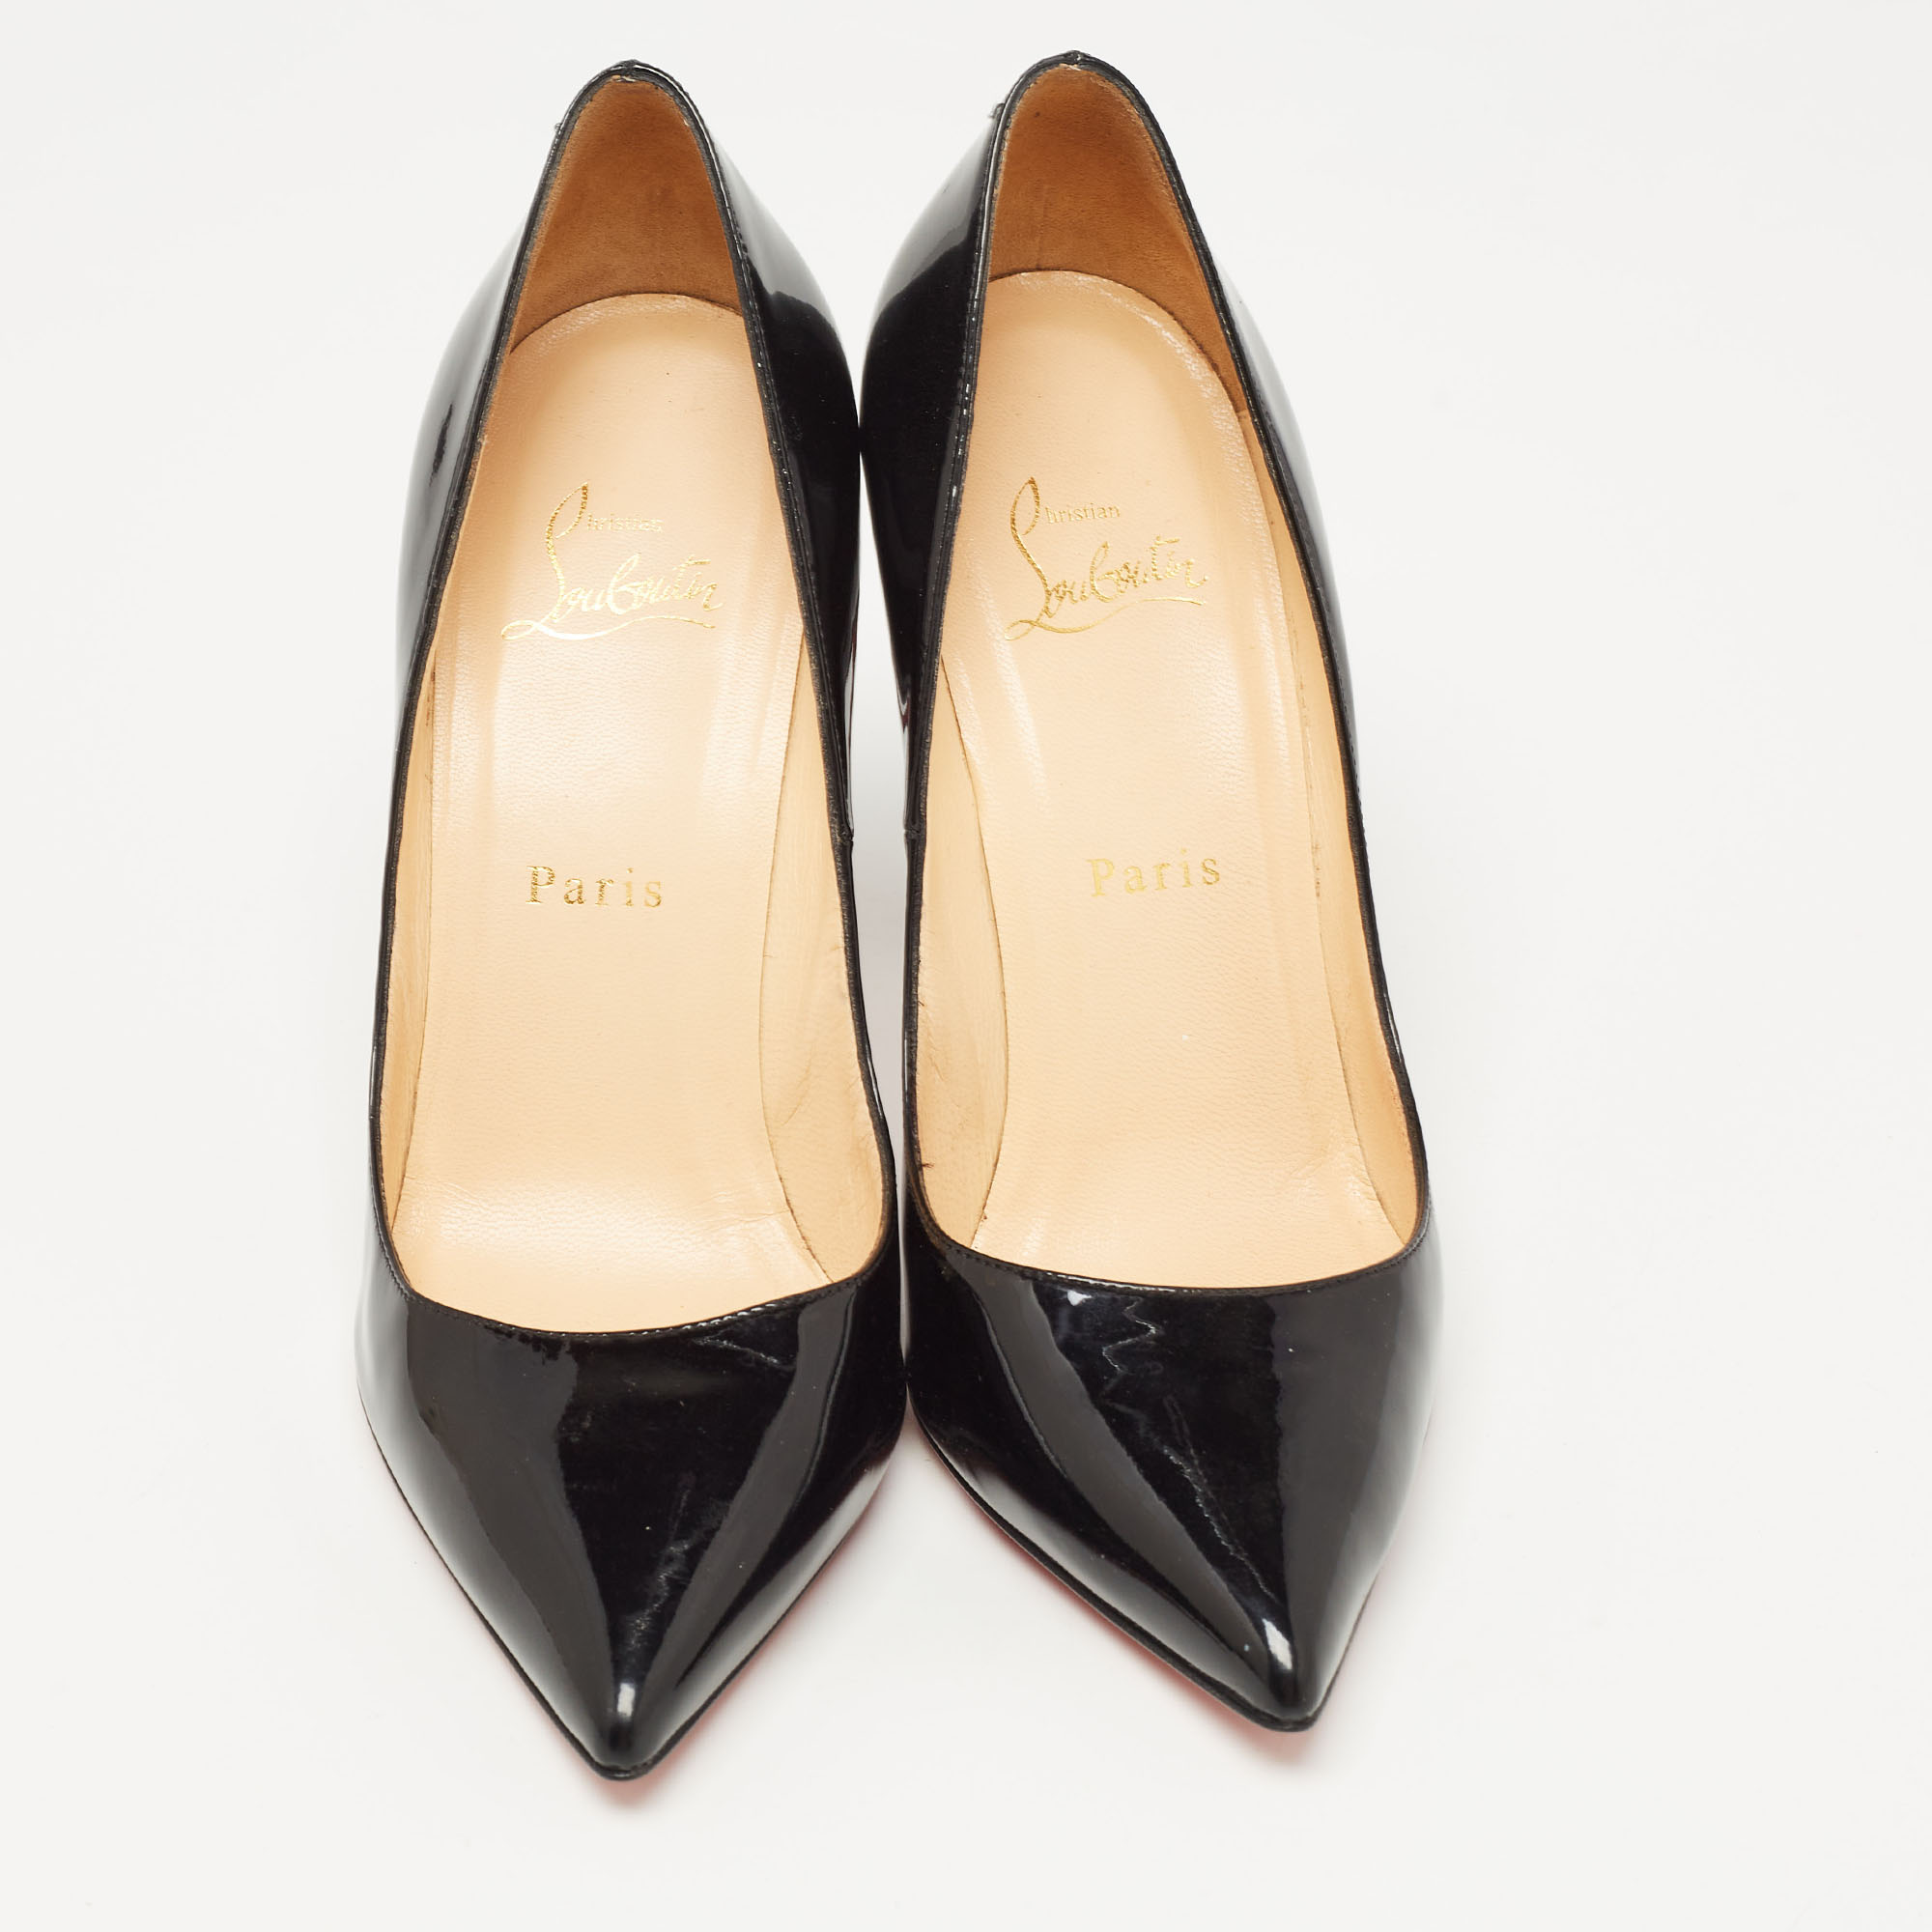 Christian Louboutin Black Patent Leather Pigalle Pumps Size 38.5